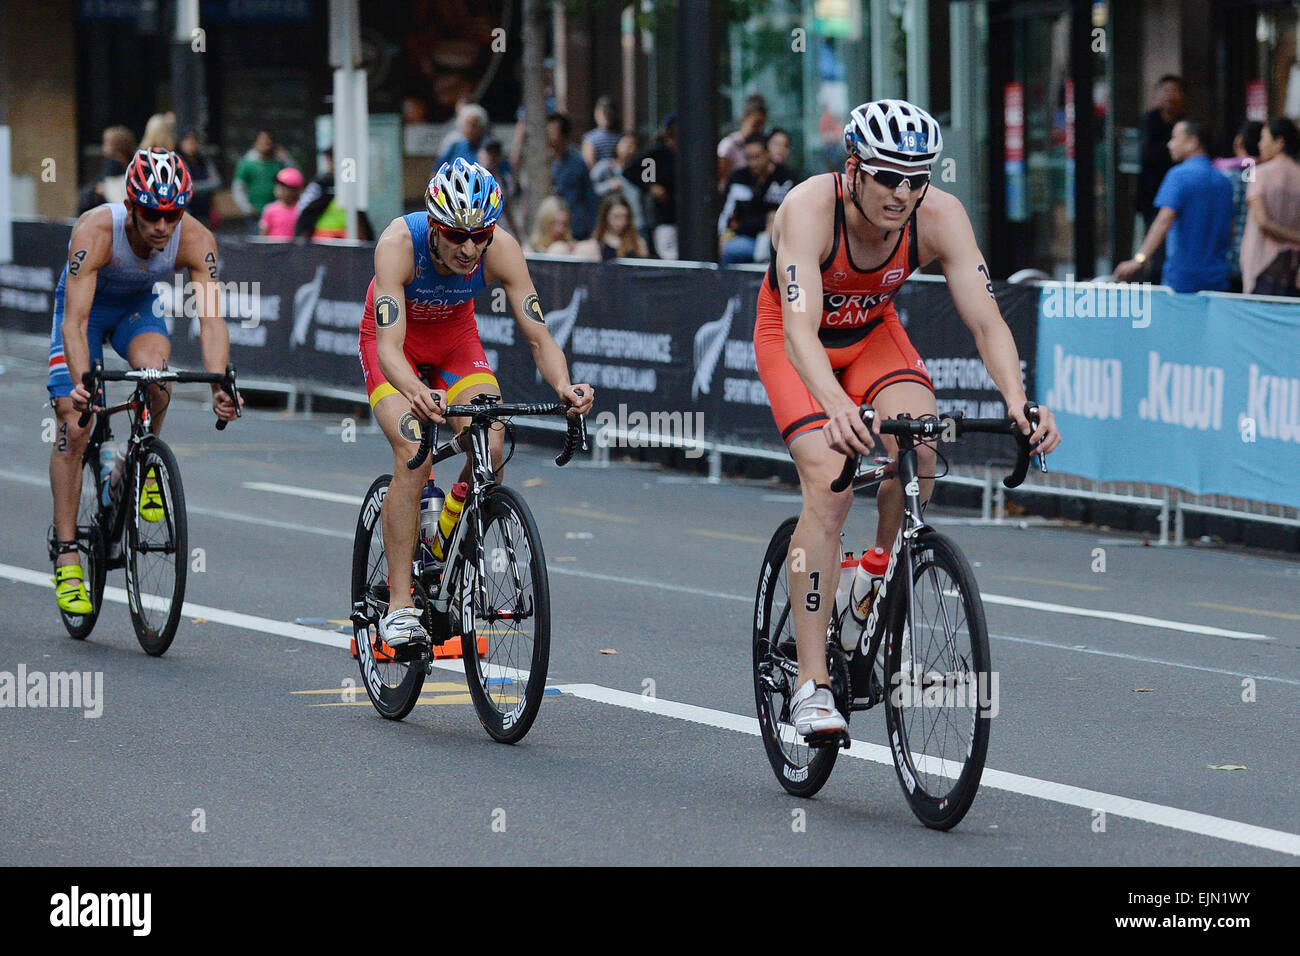 Auckland, New Zealand. 29th Mar, 2015. Auckland, New Zealand - March 29, 2015 - Leonardo Chacon (Costa Rica, CRC), Mario Mola (Spain, ESP) and Andrew Yorke (Canada, CAN), L-R, during the bike stage at the 2015 International World Triathlon Series Elite Men on March 29, 2015 in Auckland, New Zealand. © dpa/Alamy Live News Stock Photo